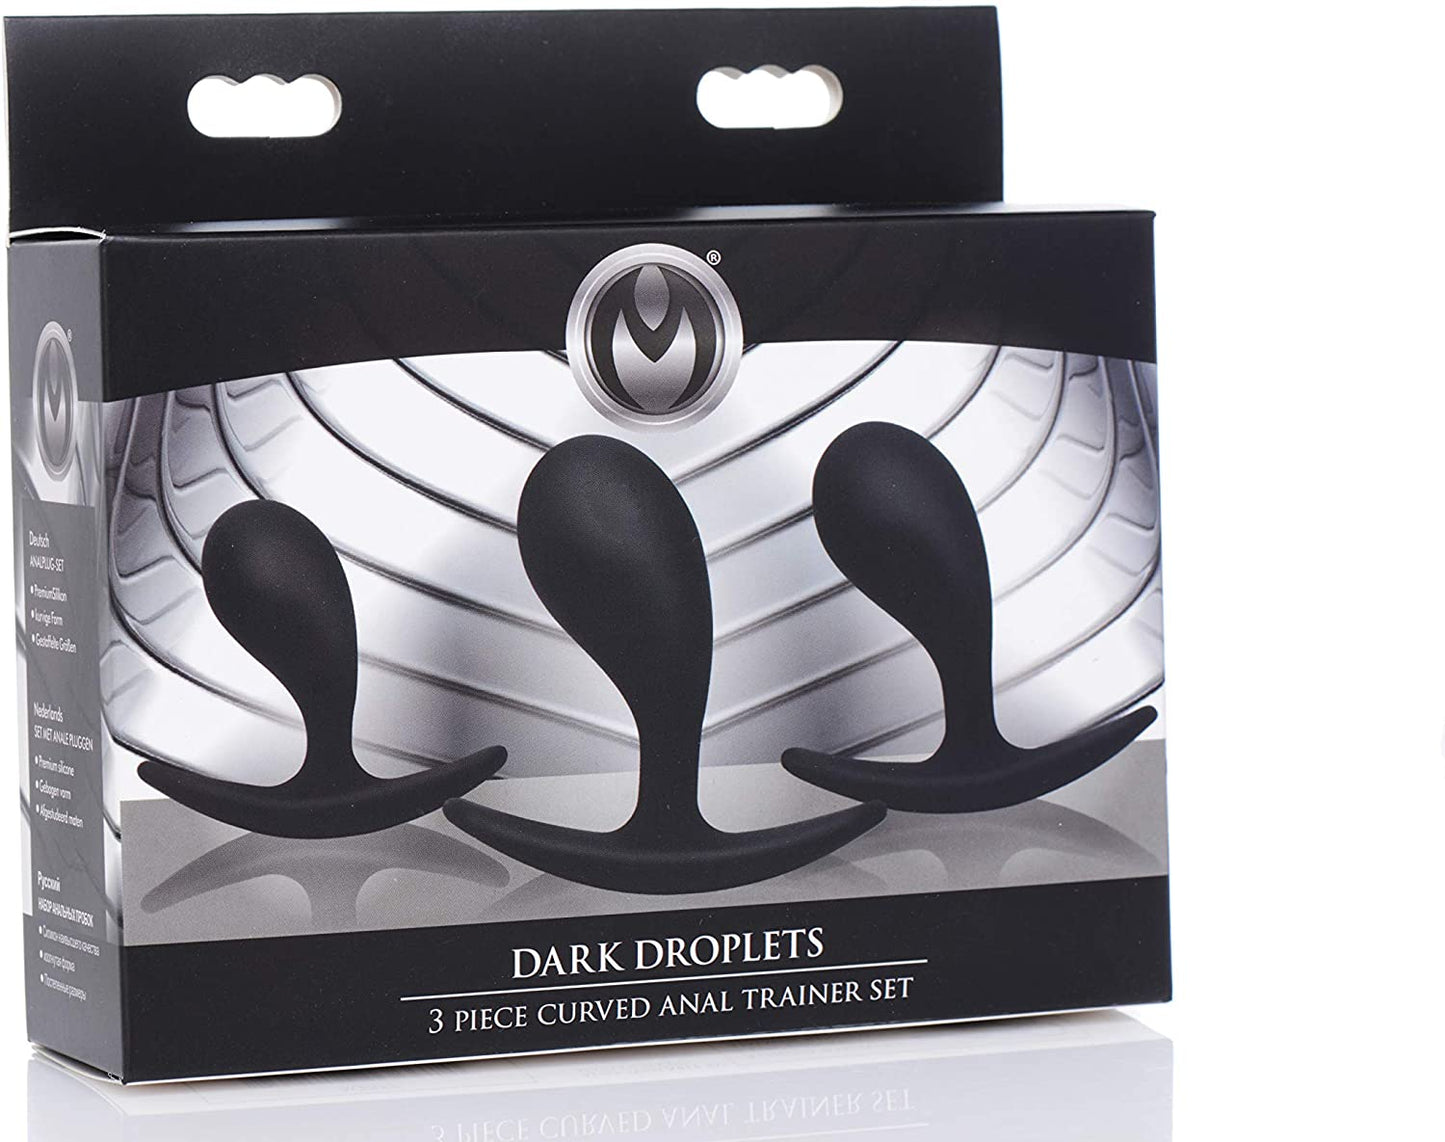 Dark Droplets 3 Piece Curved Silicone Anal Trainer Set (6937609371812)